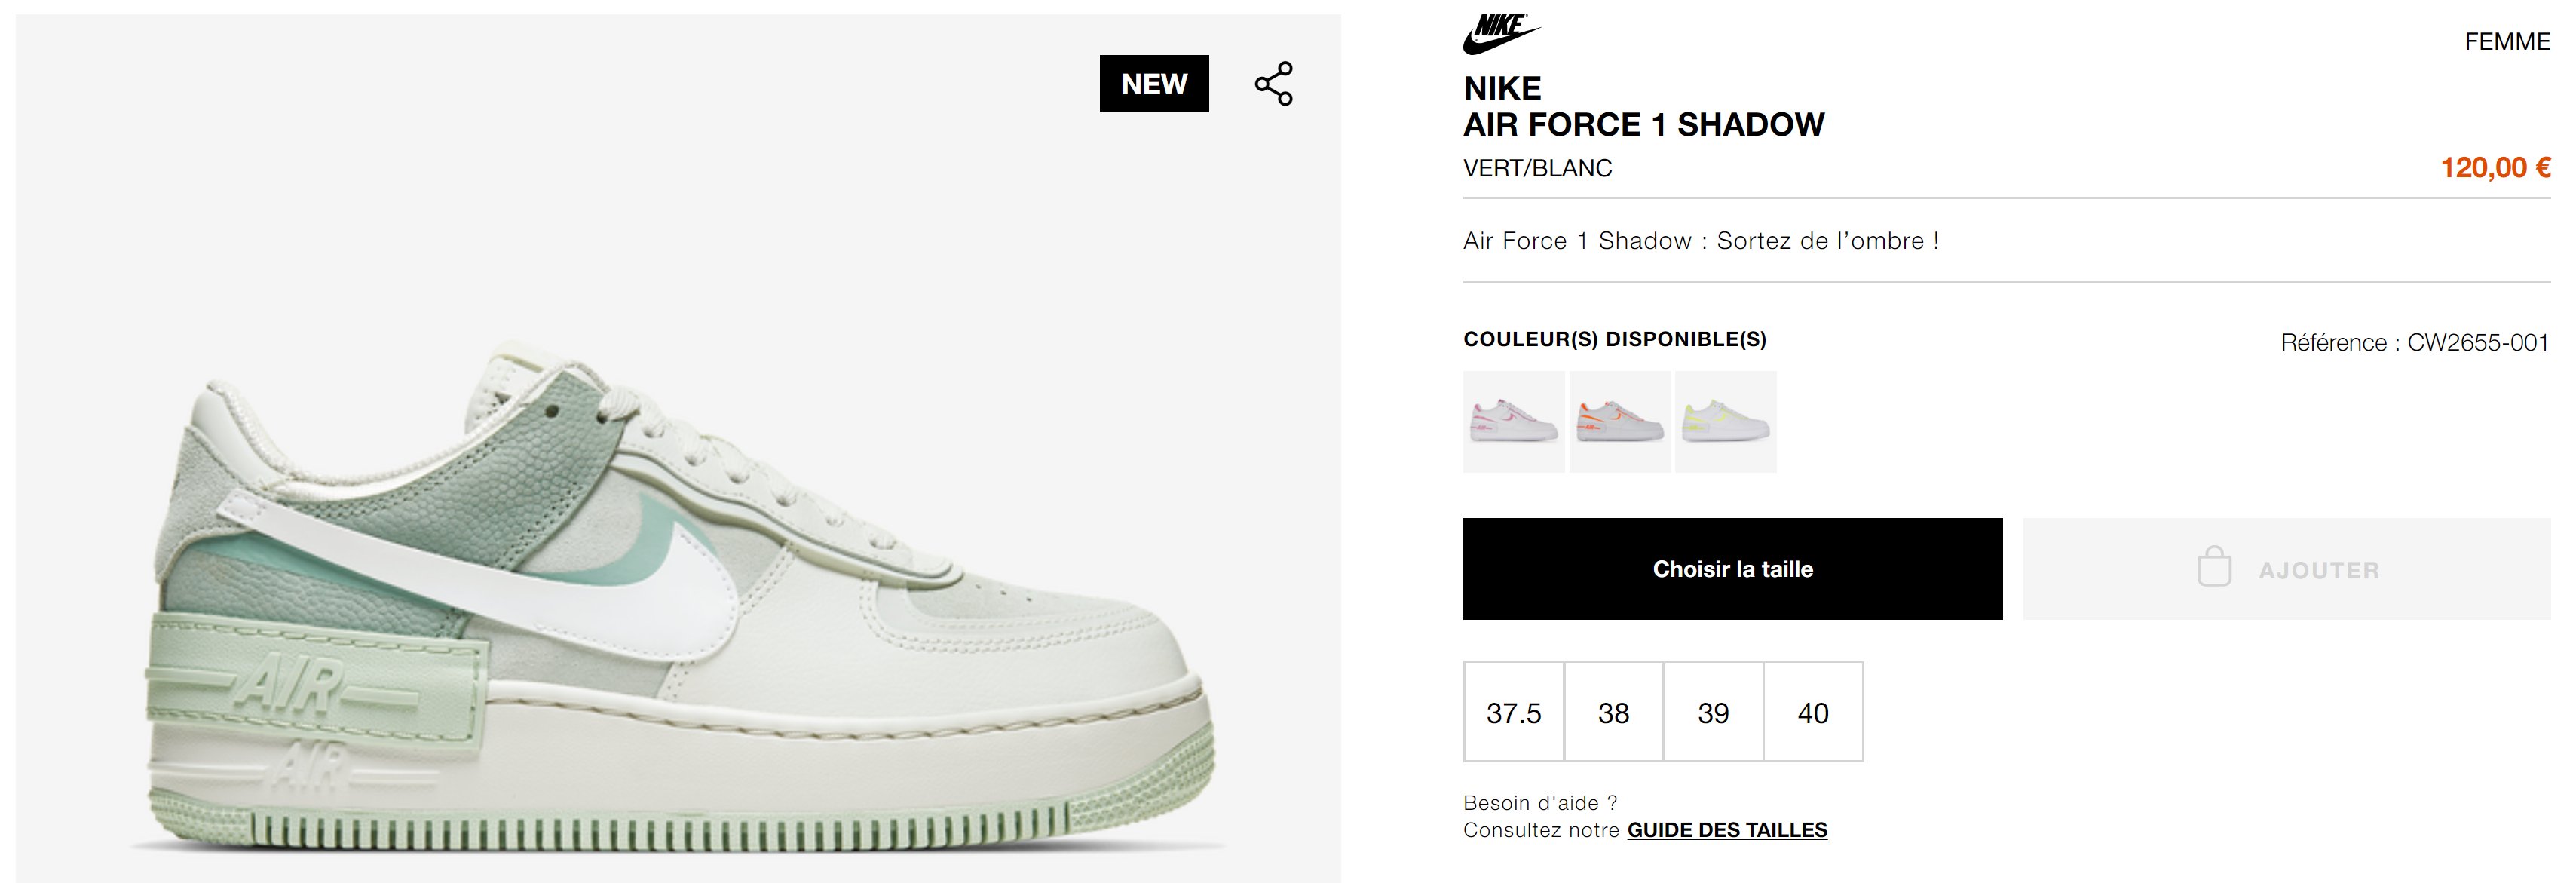 MoreSneakers.com on Twitter: "EU ONLY: Women's Nike Air Force 1 Shadow  'Pistachio Frost' now live via Courir =&gt; https://t.co/NsfsI9L0l5  https://t.co/ic3S9nQIYw" / Twitter